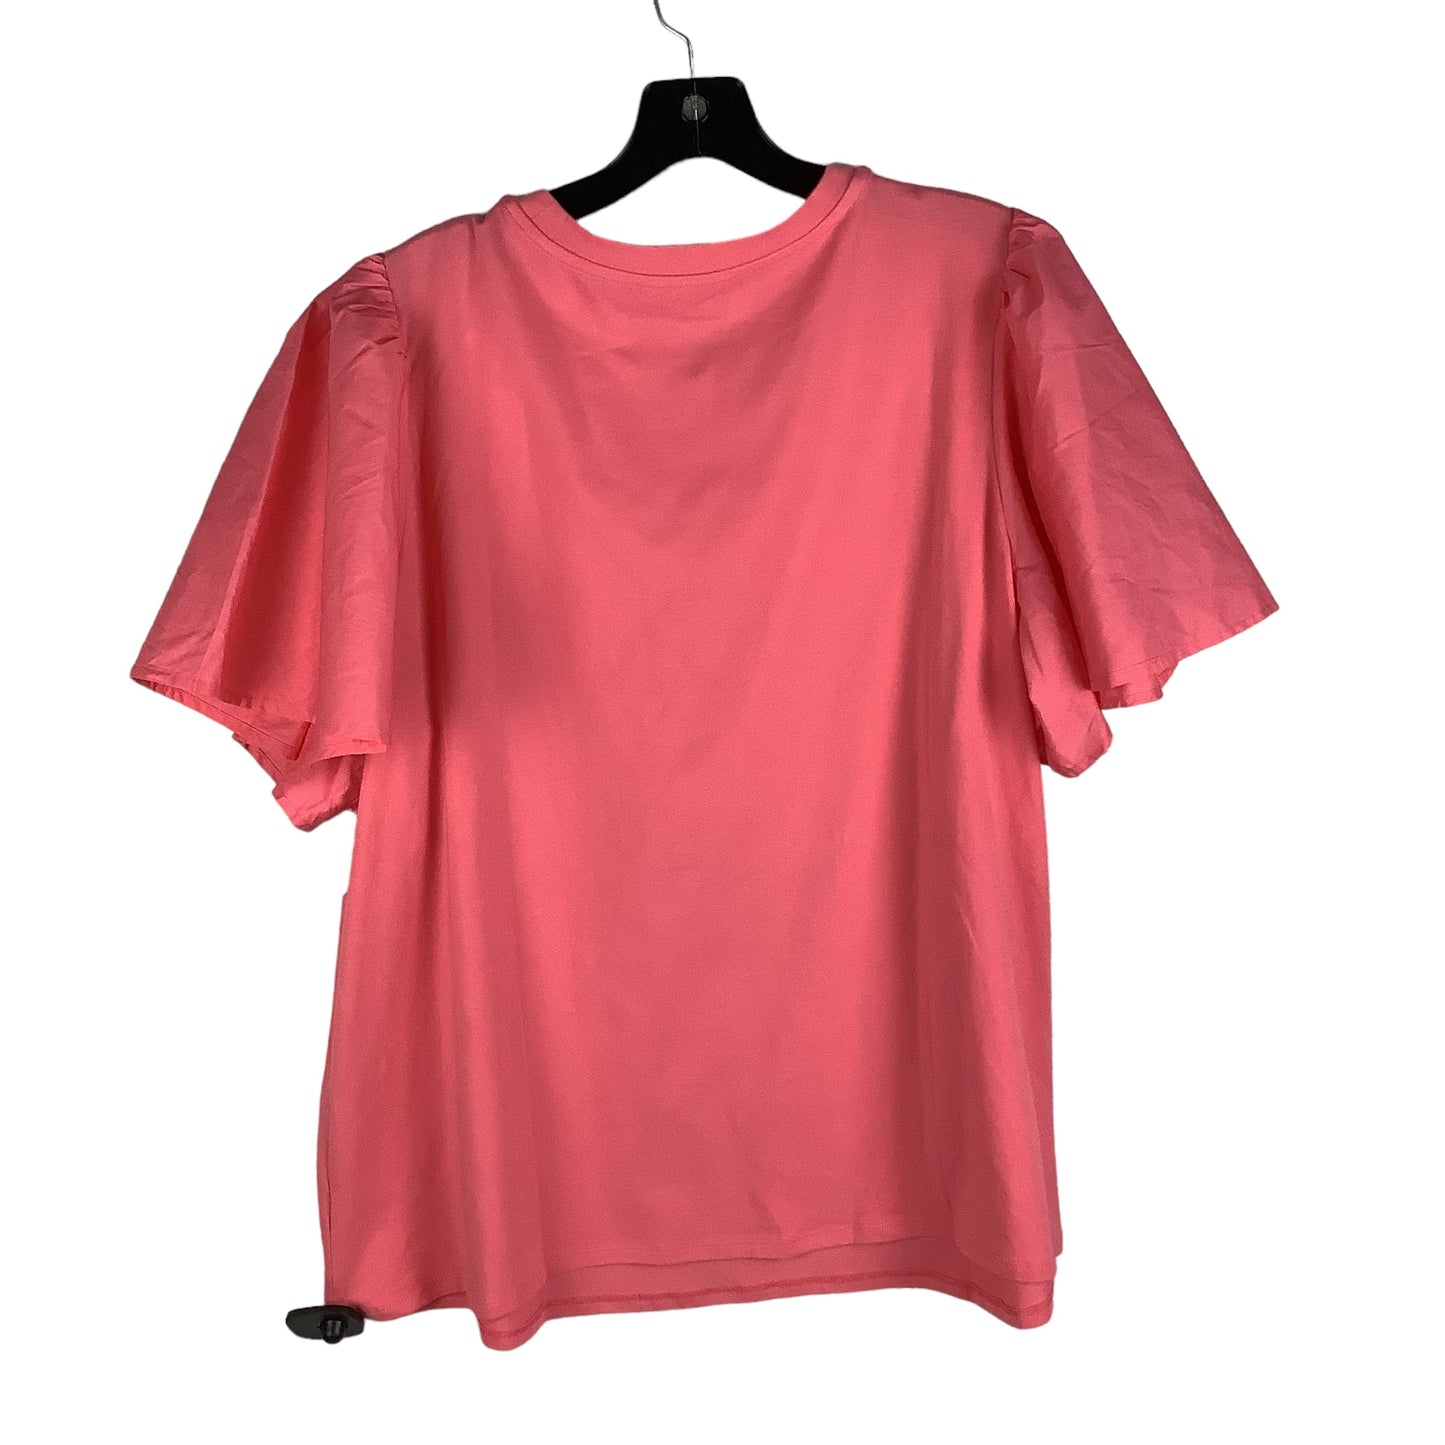 Pink Top Short Sleeve A New Day, Size 1x